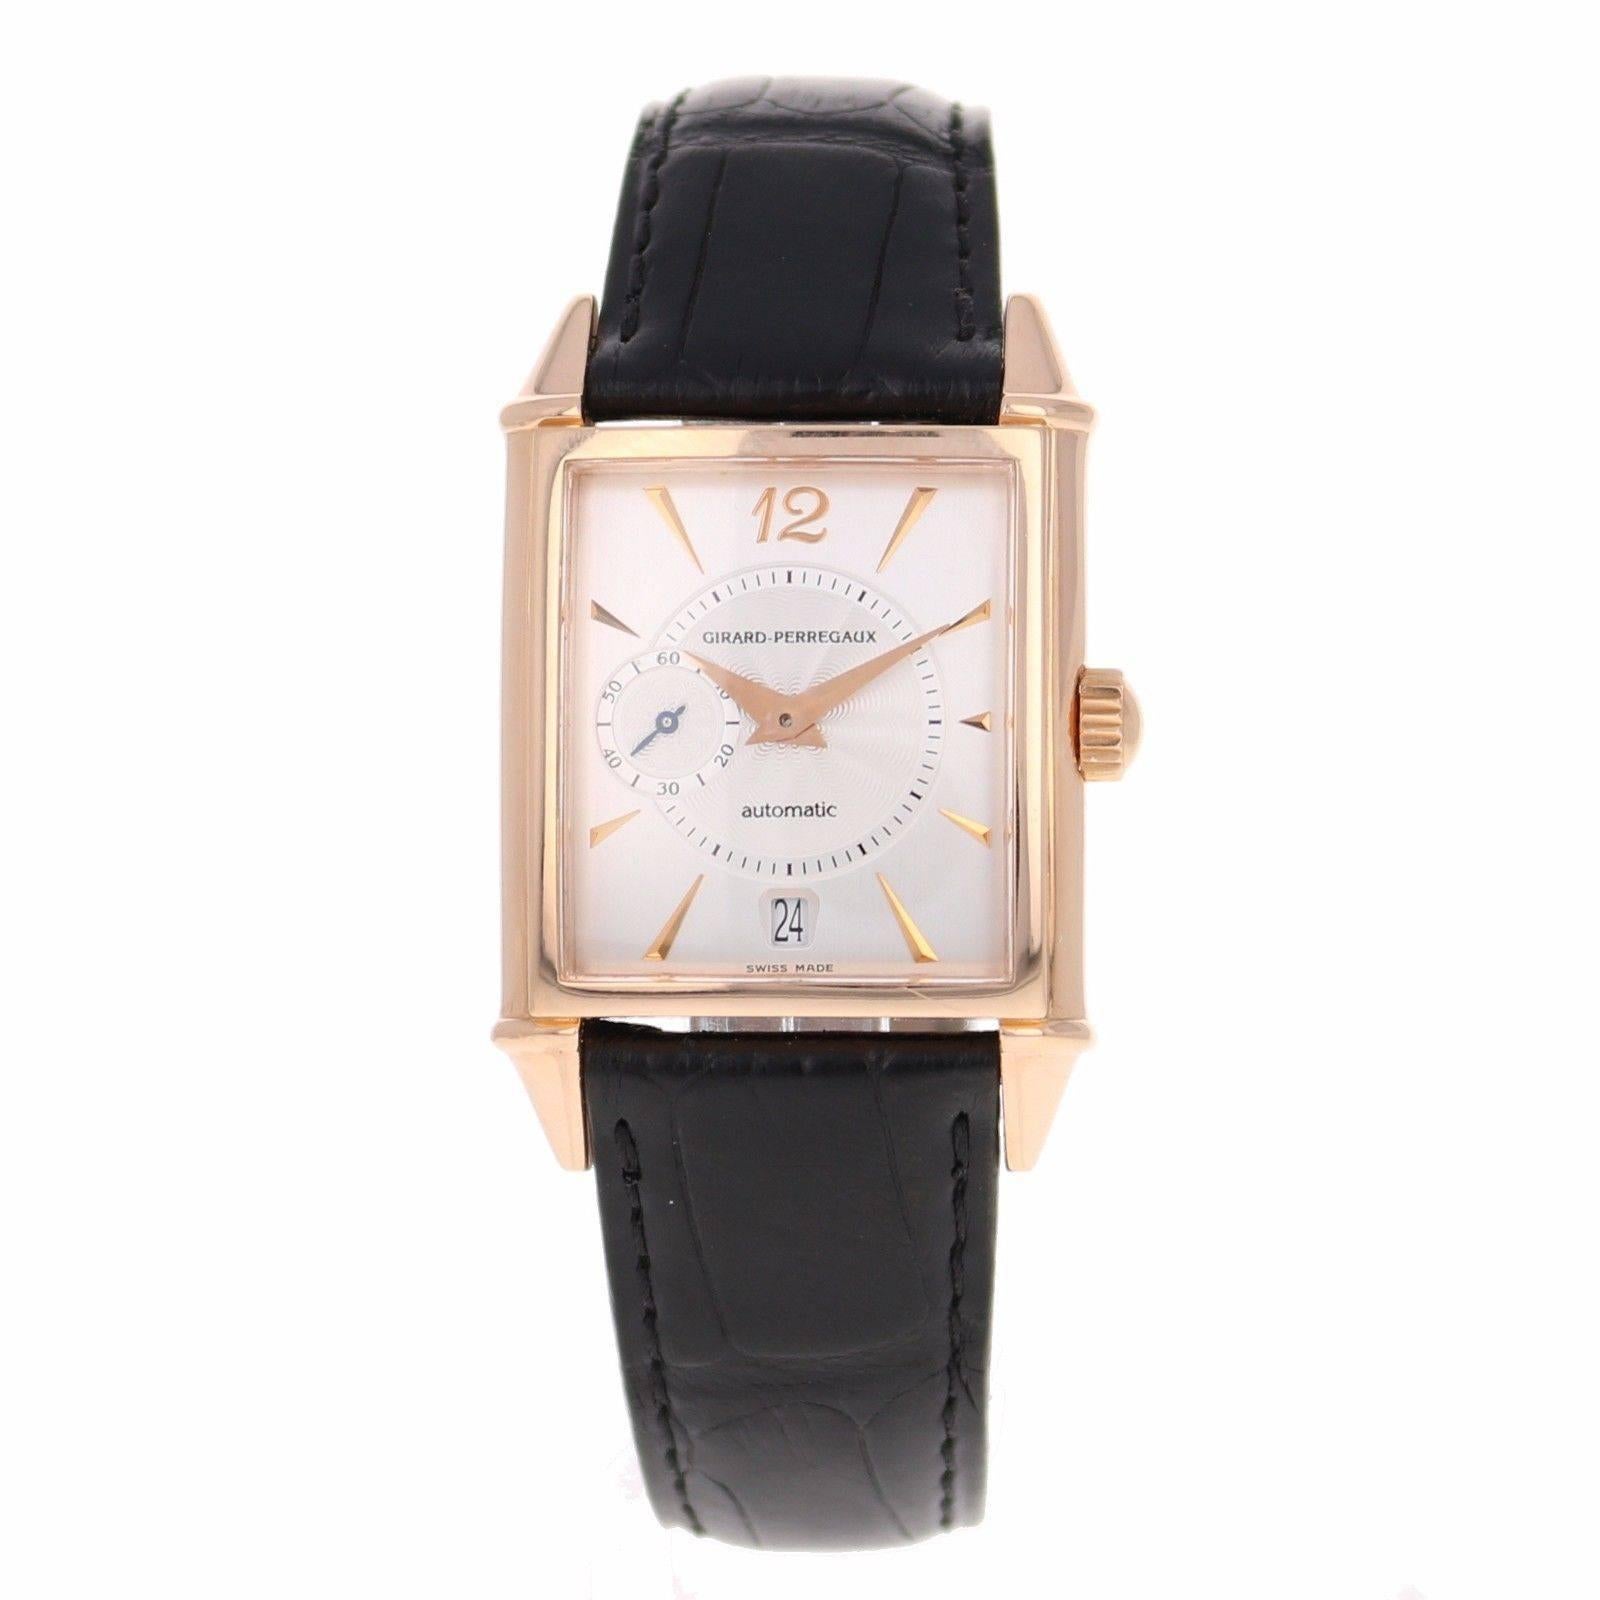 Brand Name	Girard Perregaux
Style Number	25960.0.52.1161
Also Called	Ref. 2596
Series	Vintage 1945
Gender	Men's
Case Material	18k Rose Gold
Dial Color	Silver
Movement	Automatic
Functions	Hours, Minutes, Seconds, Date
Crystal Material	Sapphire
Case